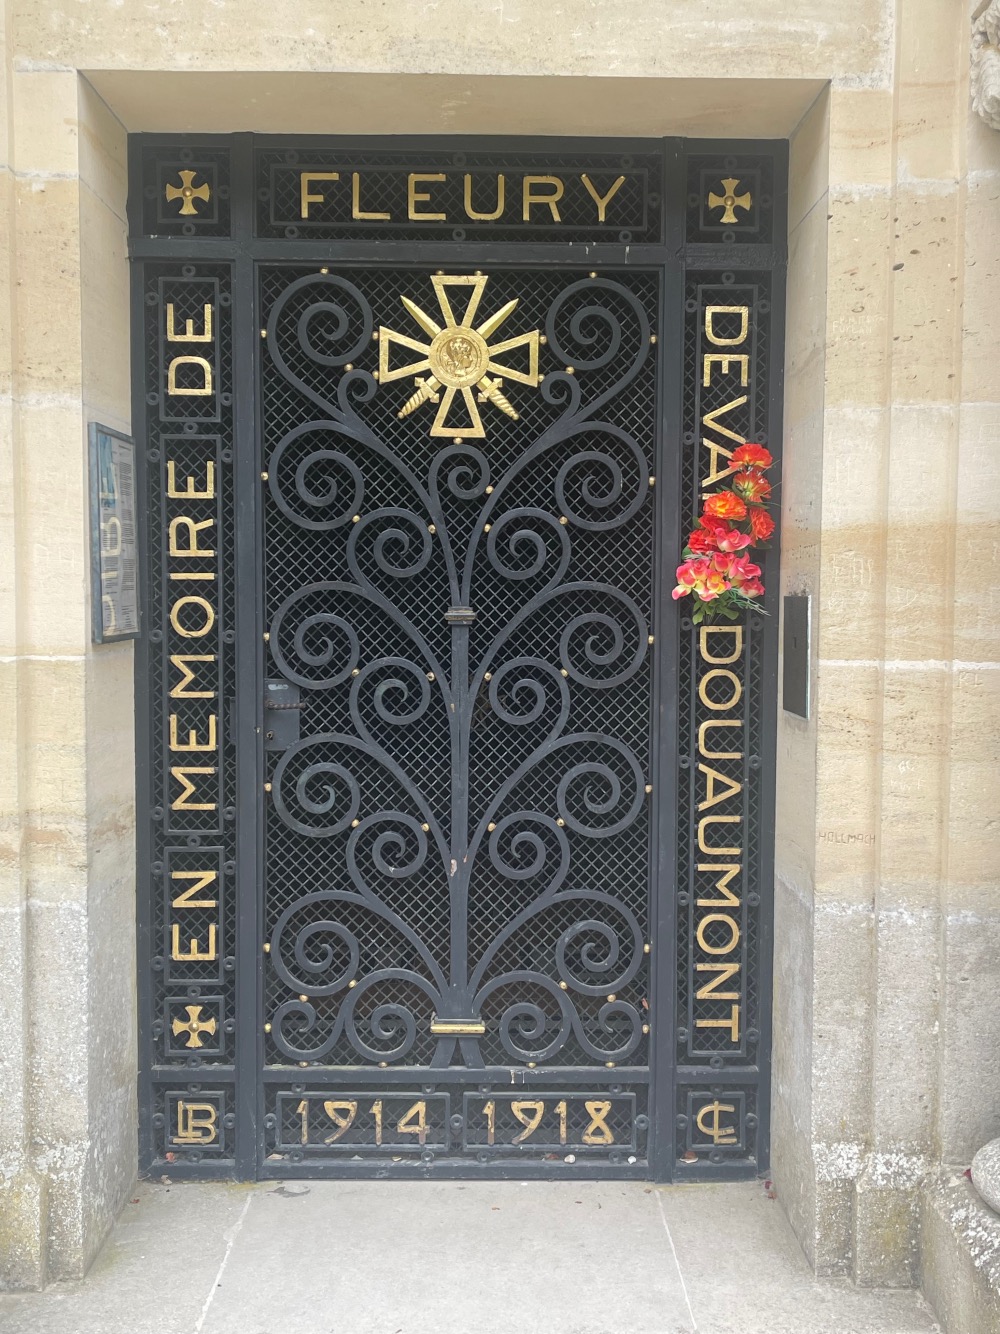 Black iron gate with intricate designs, featuring a gold star emblem at the top and inscribed with "fleury devant douaumont 1914 - 1918 en memoire de" above red flowers to the side.